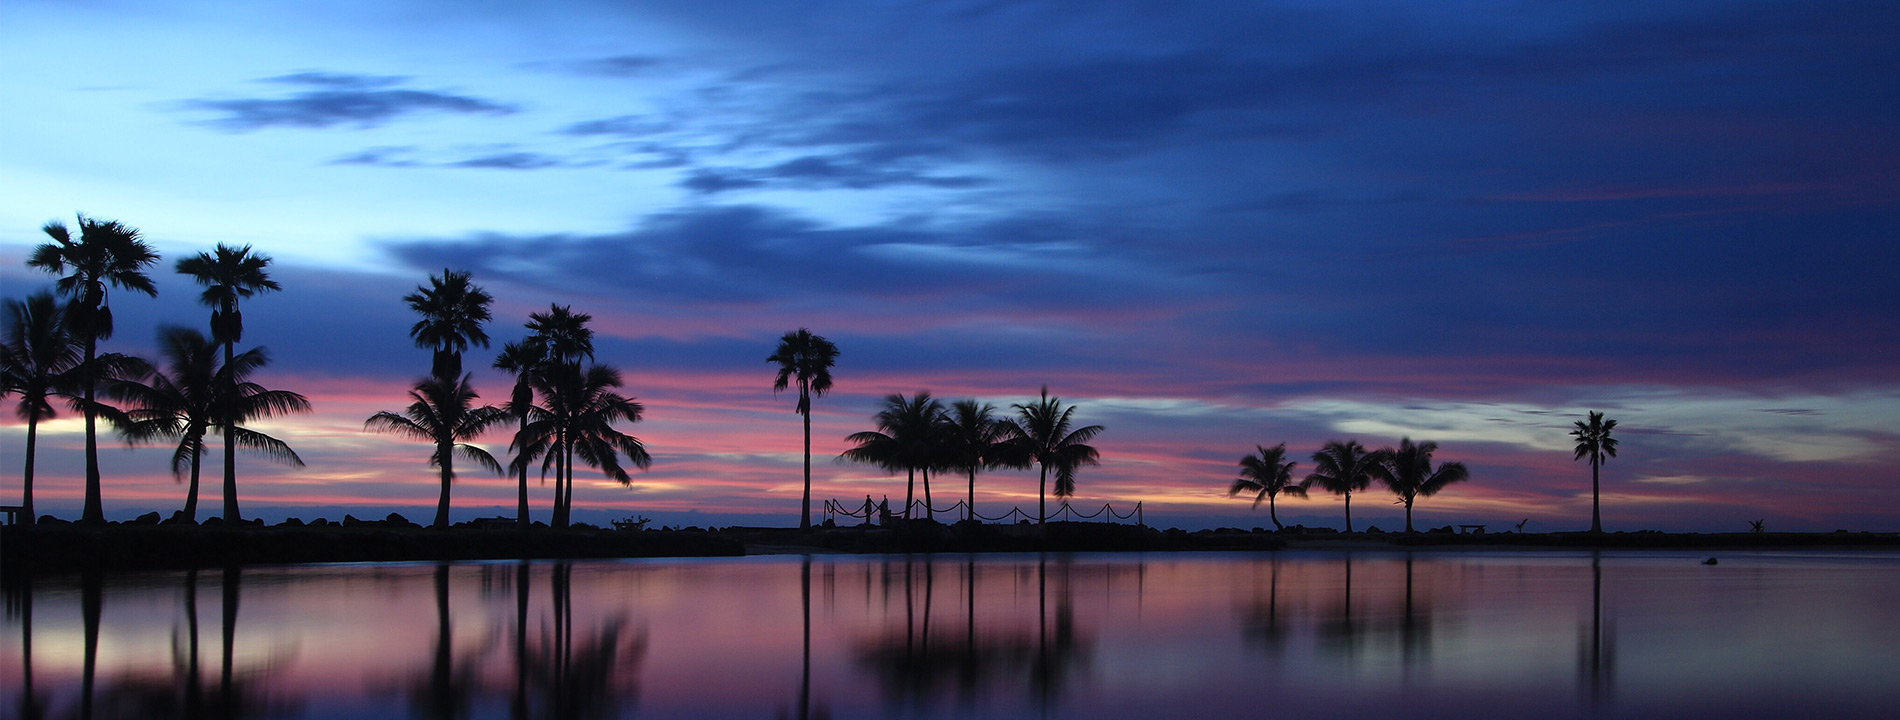 scenic view of palm trees and colorful sky reflecting on water at dusk